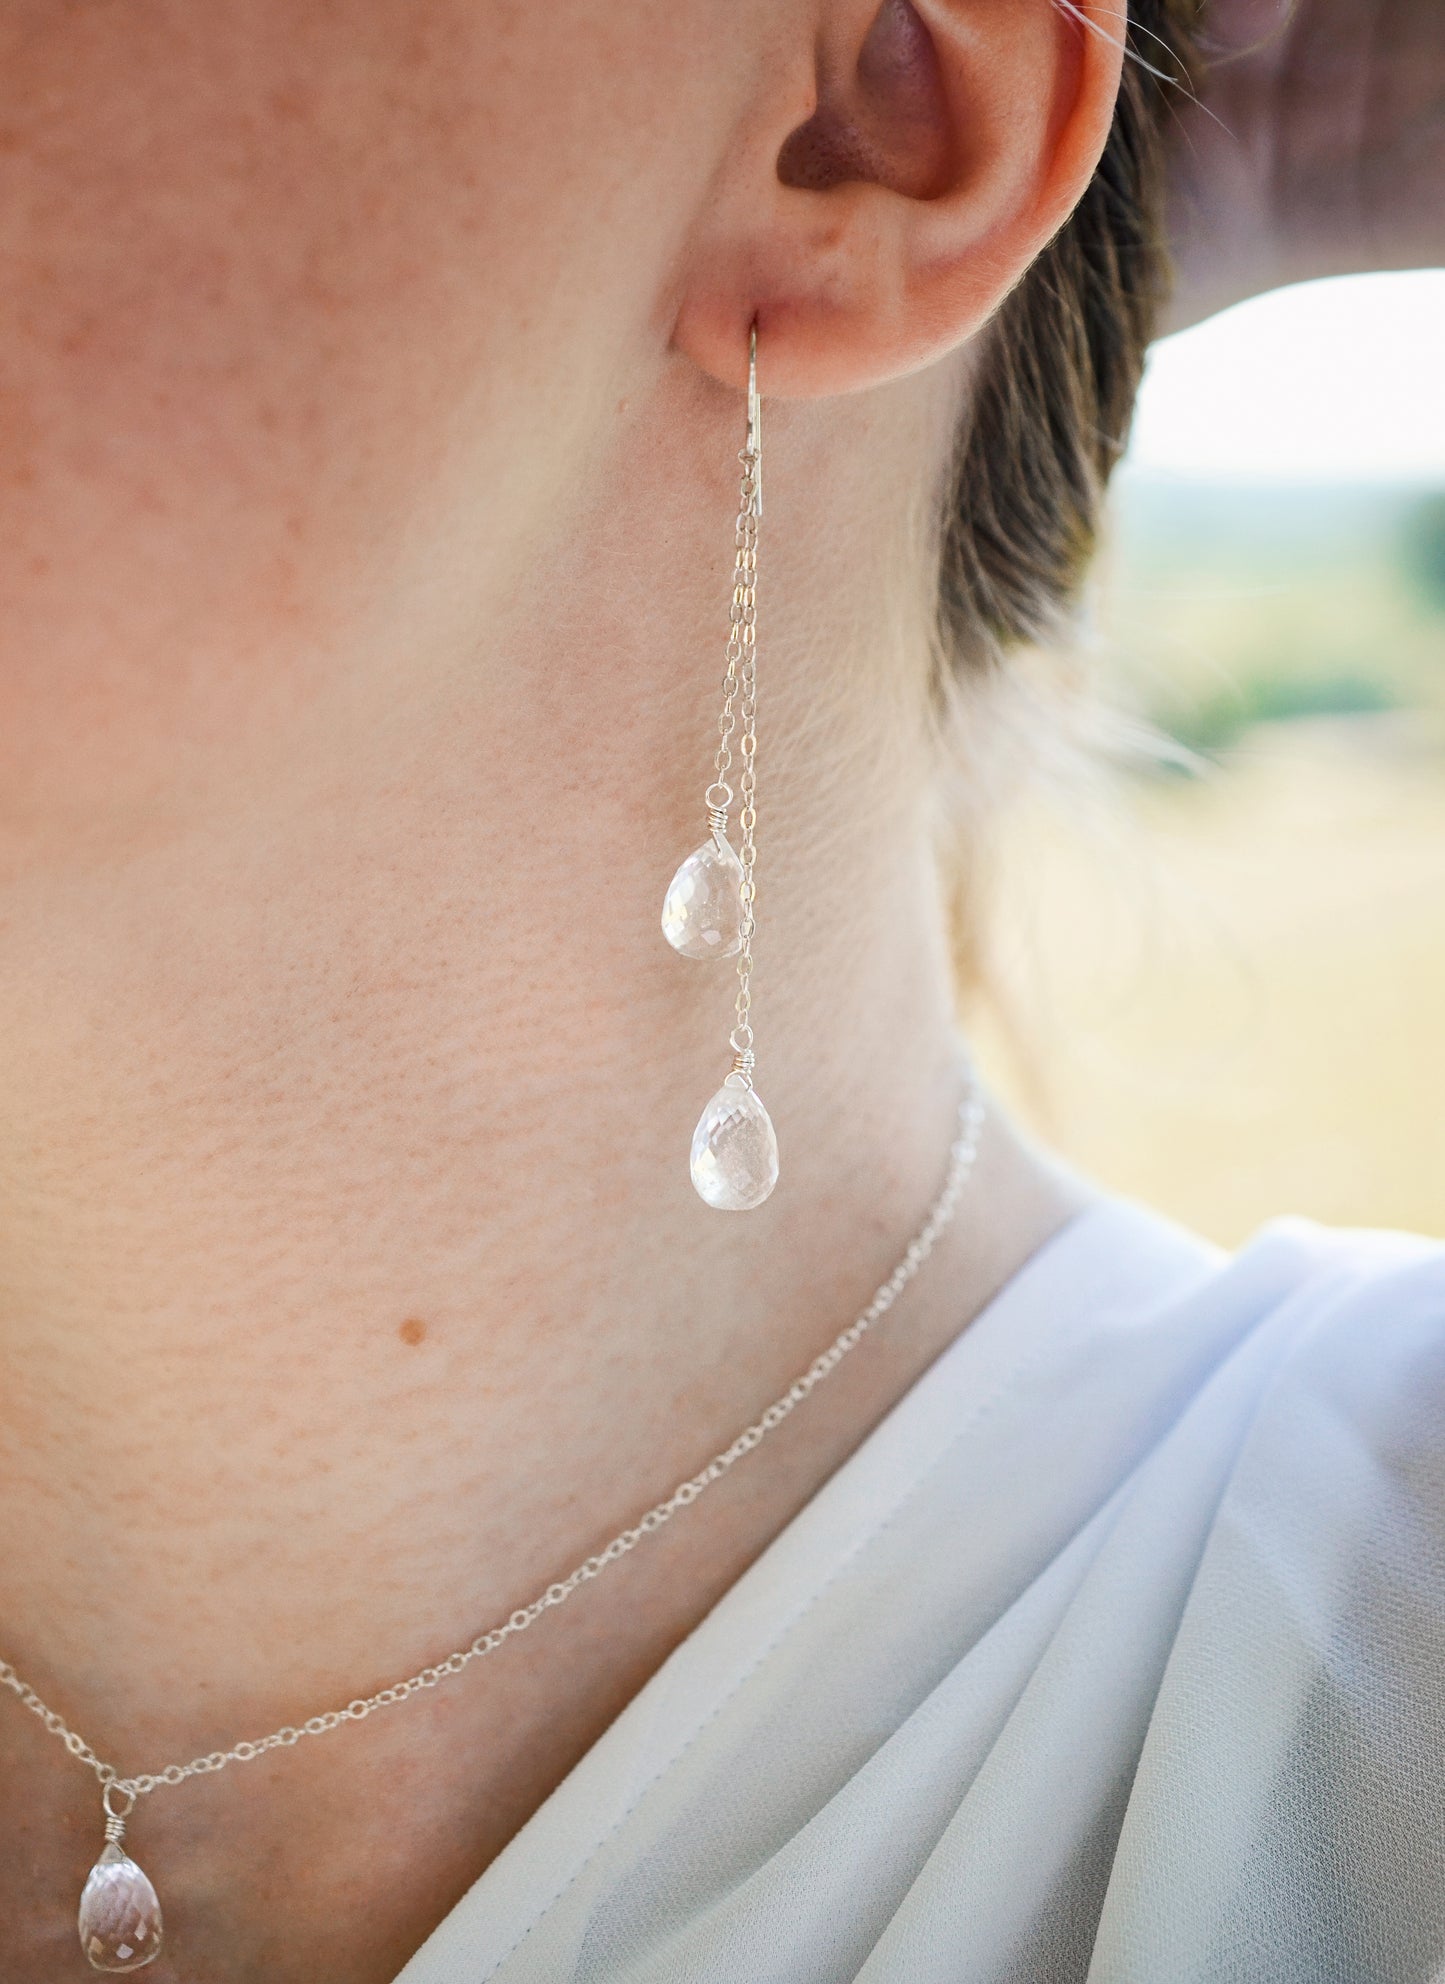 Long clear crystal quartz earrings with two teardrop dangles hanging from a dainty chain. Modeled in sterling silver with the matching necklace.